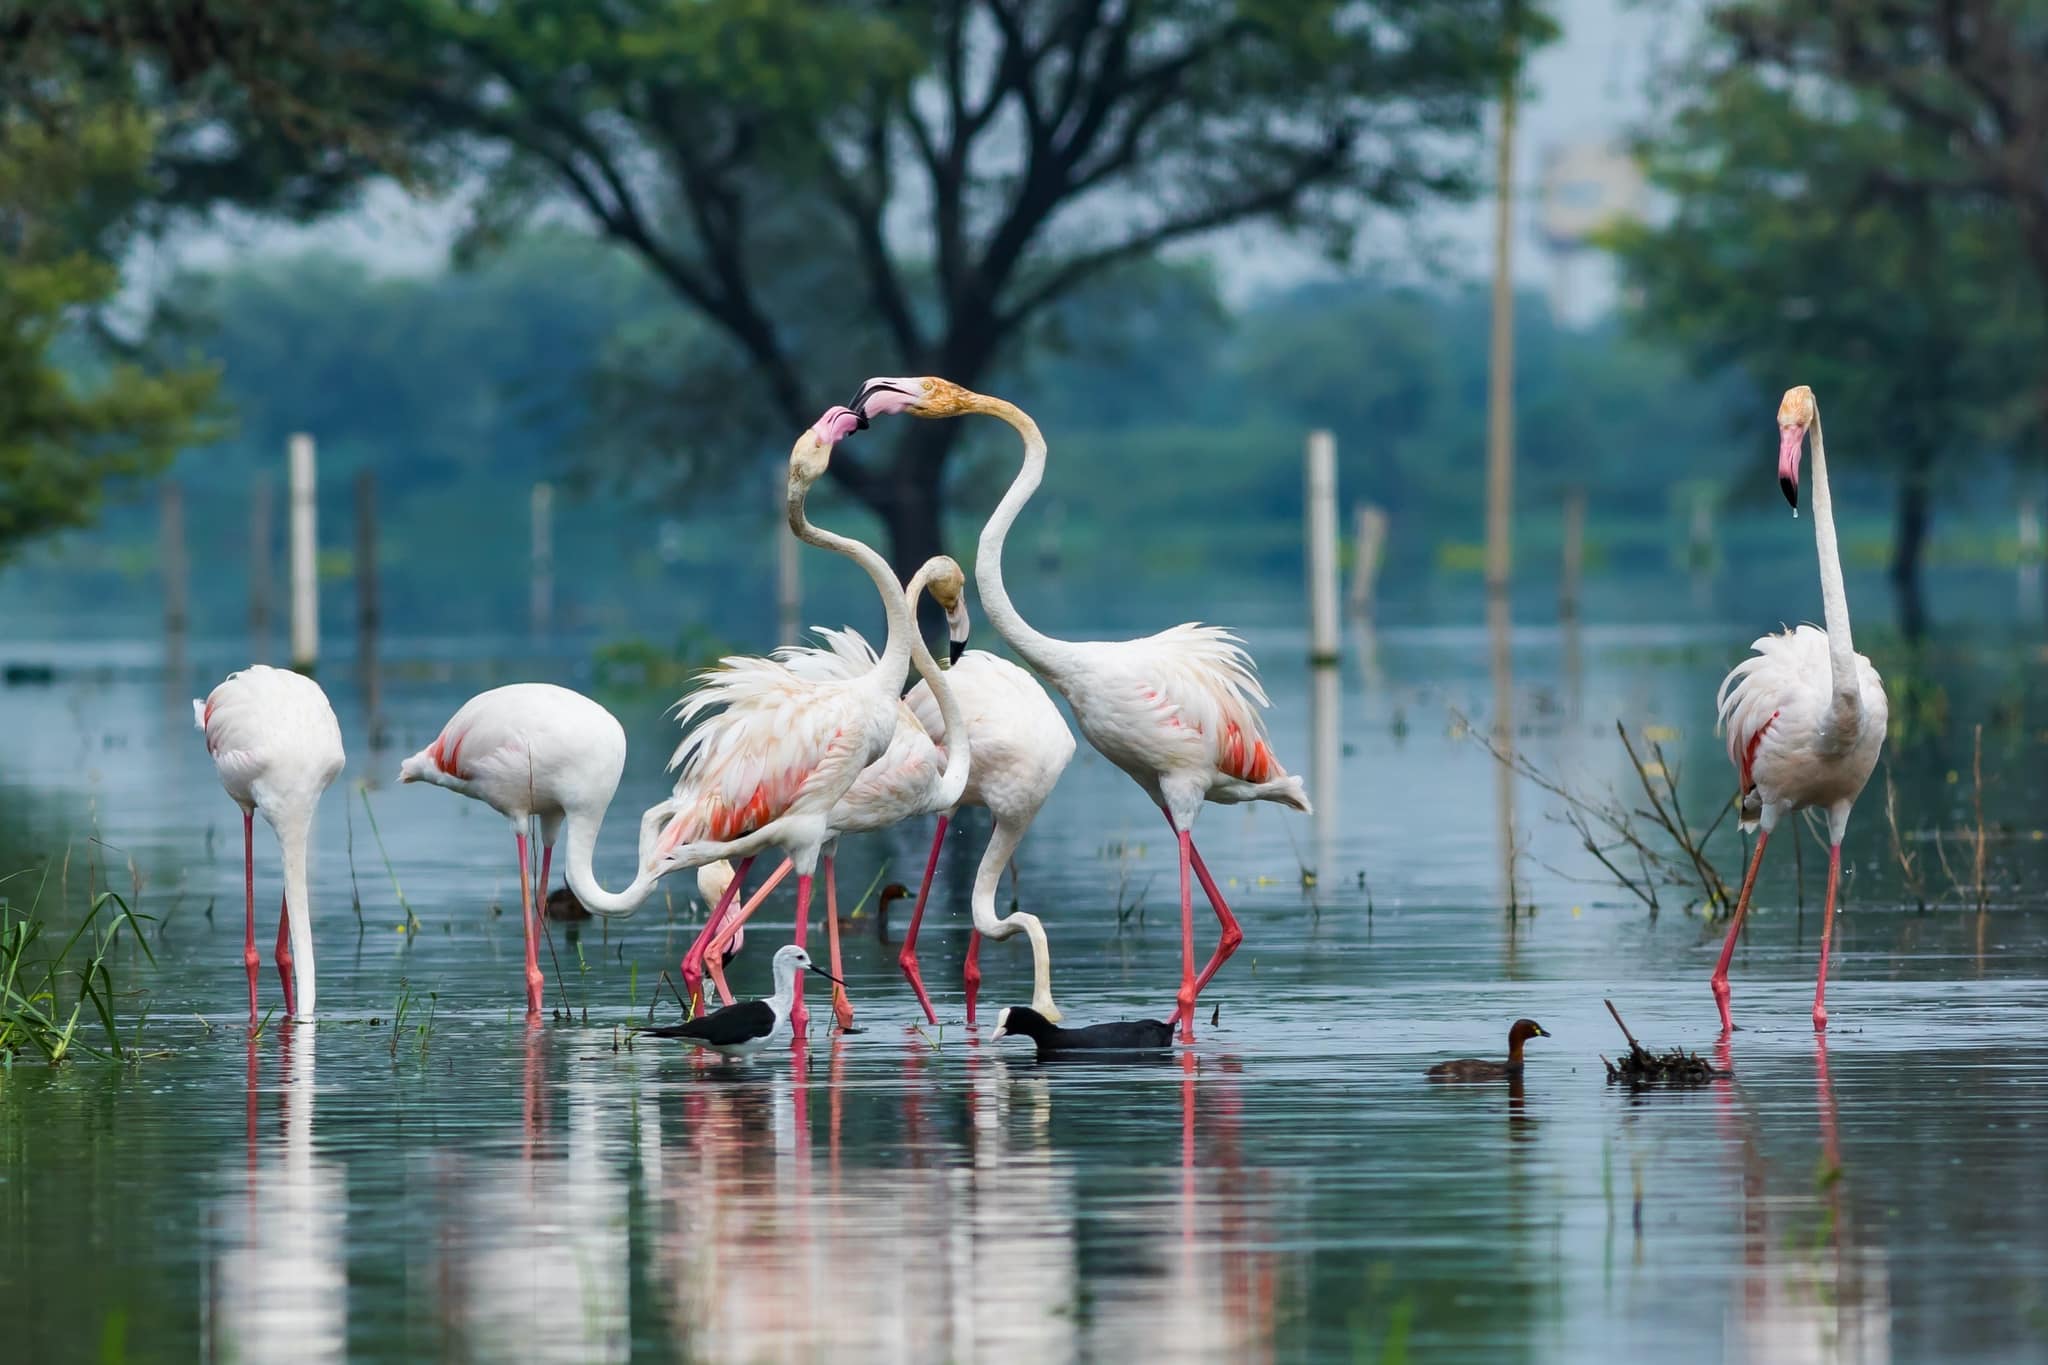 A Group Of Flamingo In The Ponds Of Bharatpur Bird Sanctuary Bharatpur Bird Sanctuary Is The Location For The Natureslens Birdlife Of Bharatpur Bird Sanctuary Photography Trip